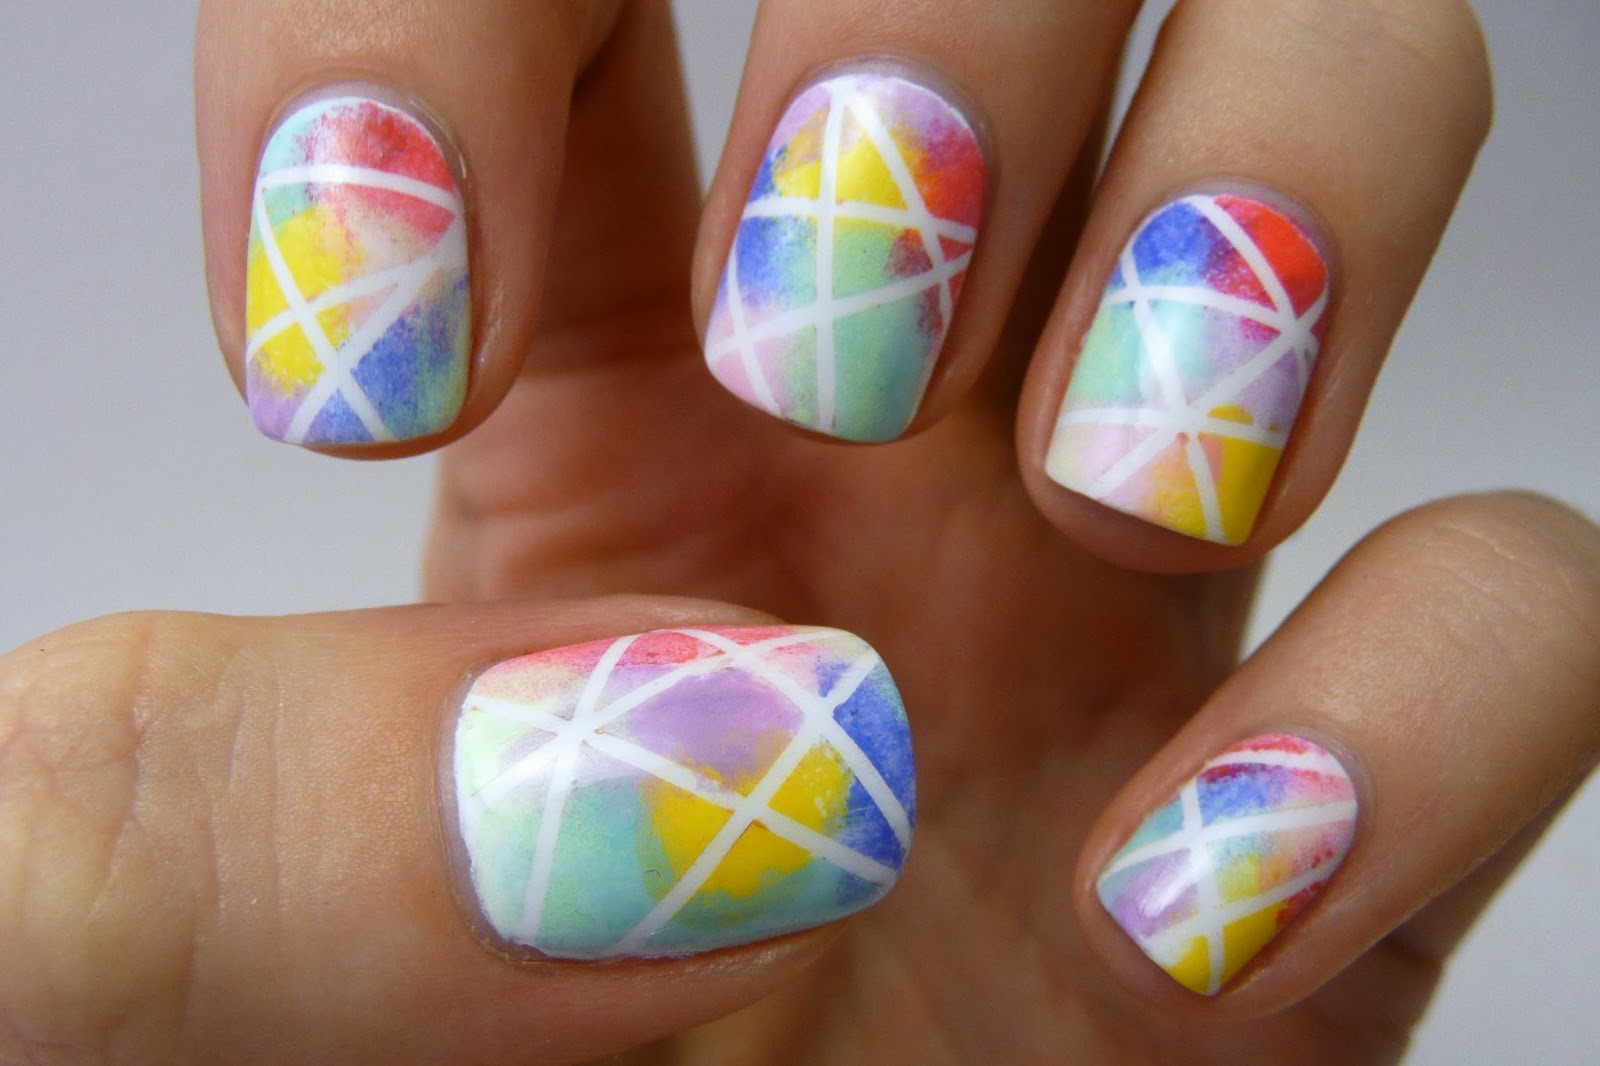 3. DIY Nail Designs with Striping Tape - wide 2